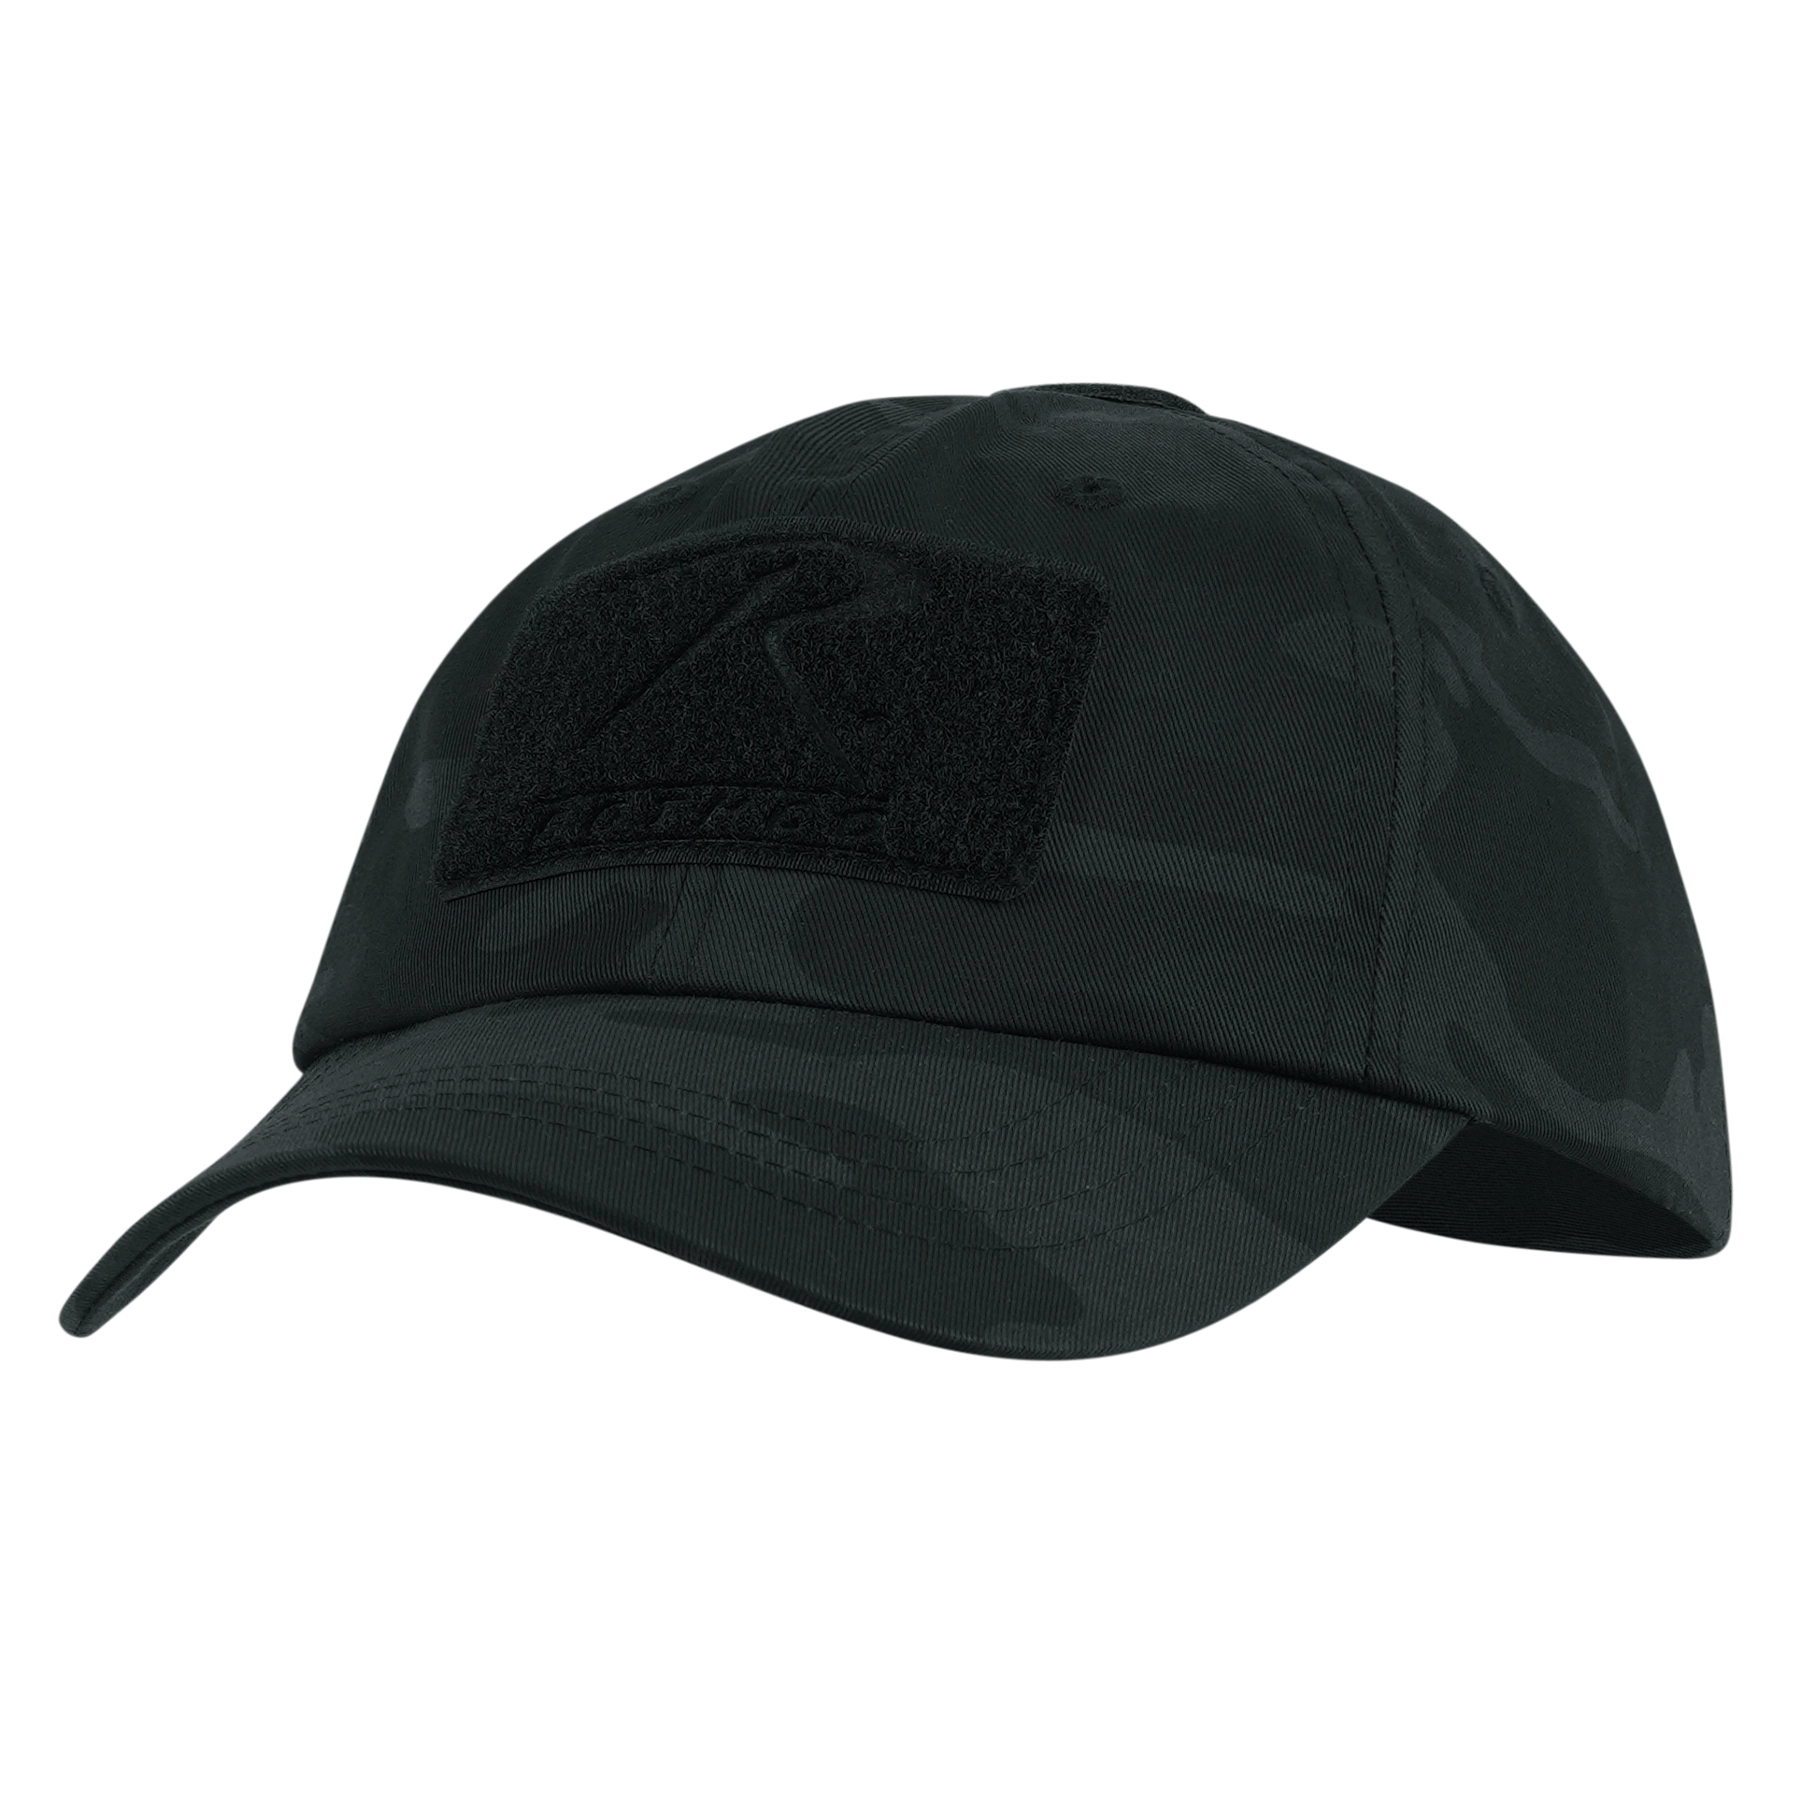 Rothco Midnight Black Camo Tactical Hat